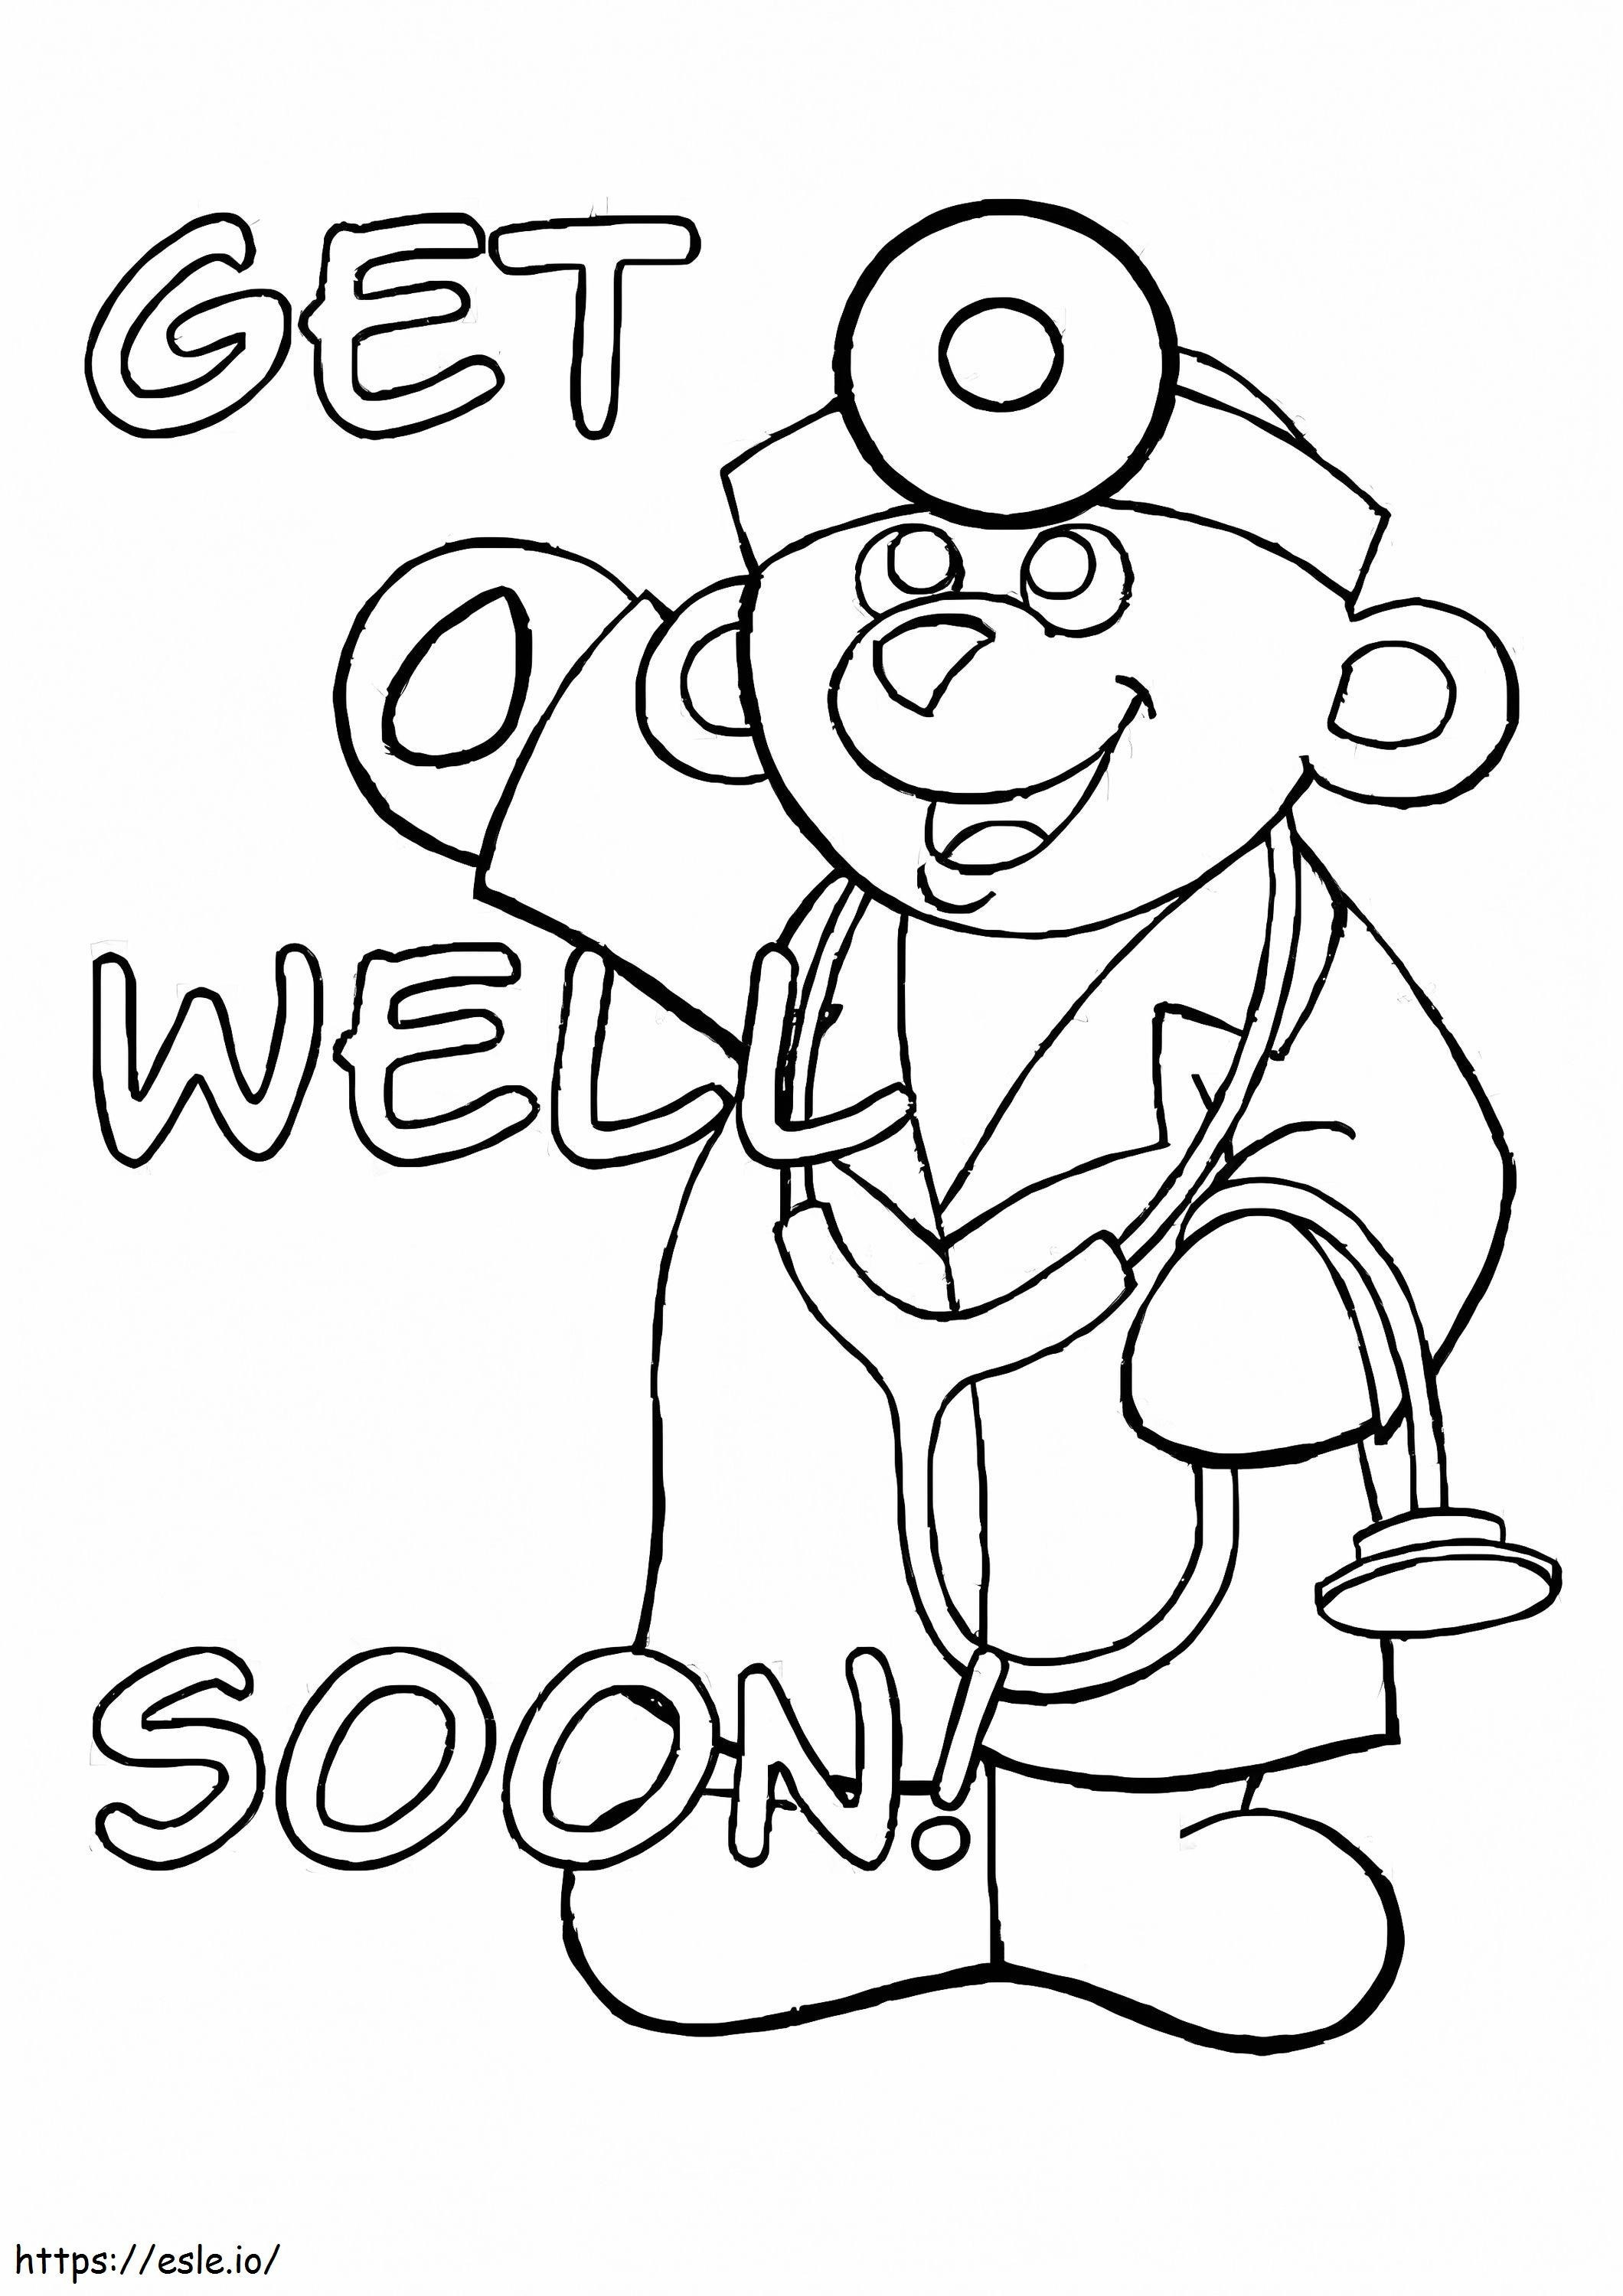 Get Well Soon Doctor coloring page